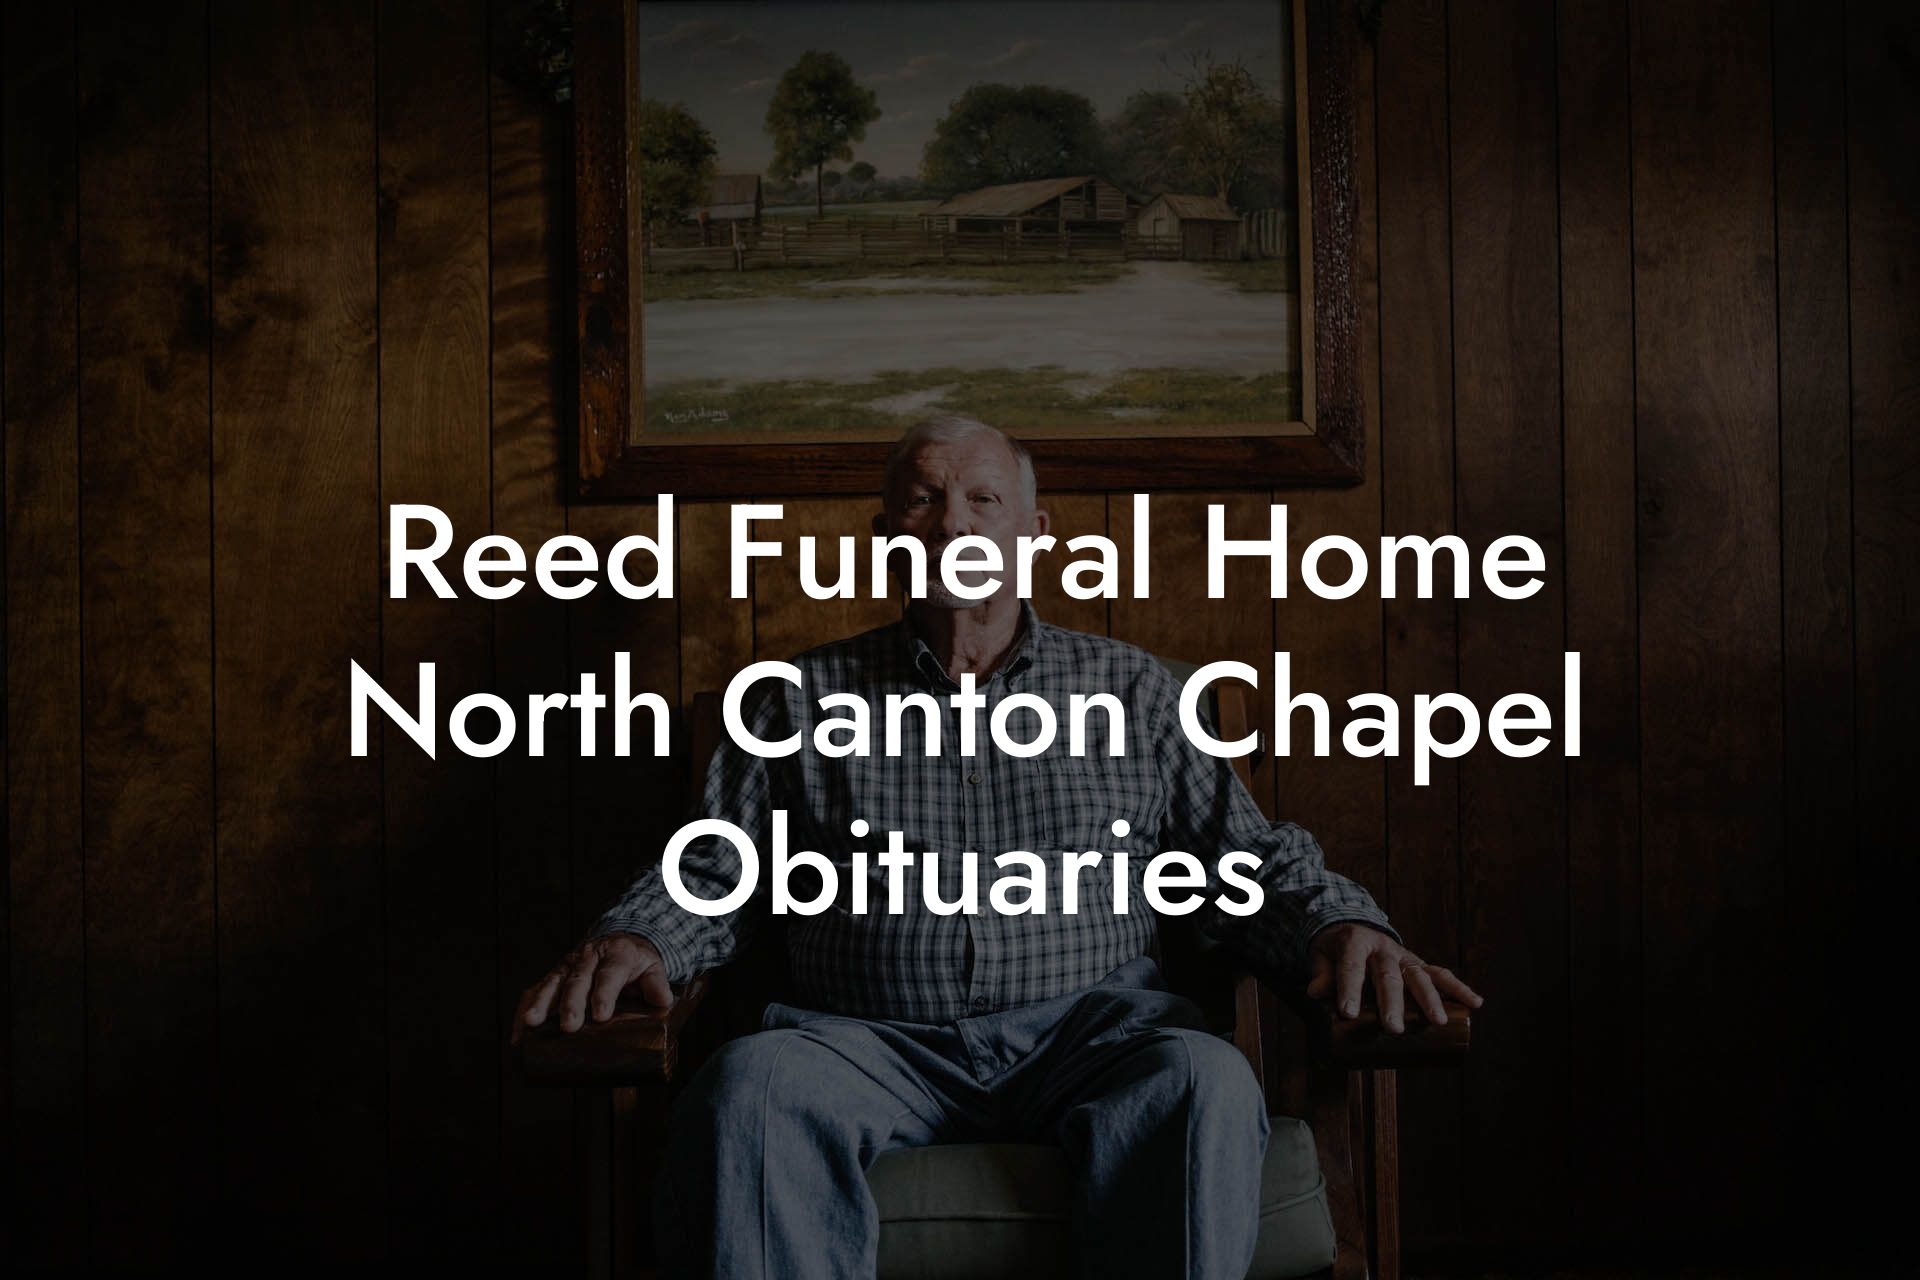 Reed Funeral Home North Canton Chapel Obituaries